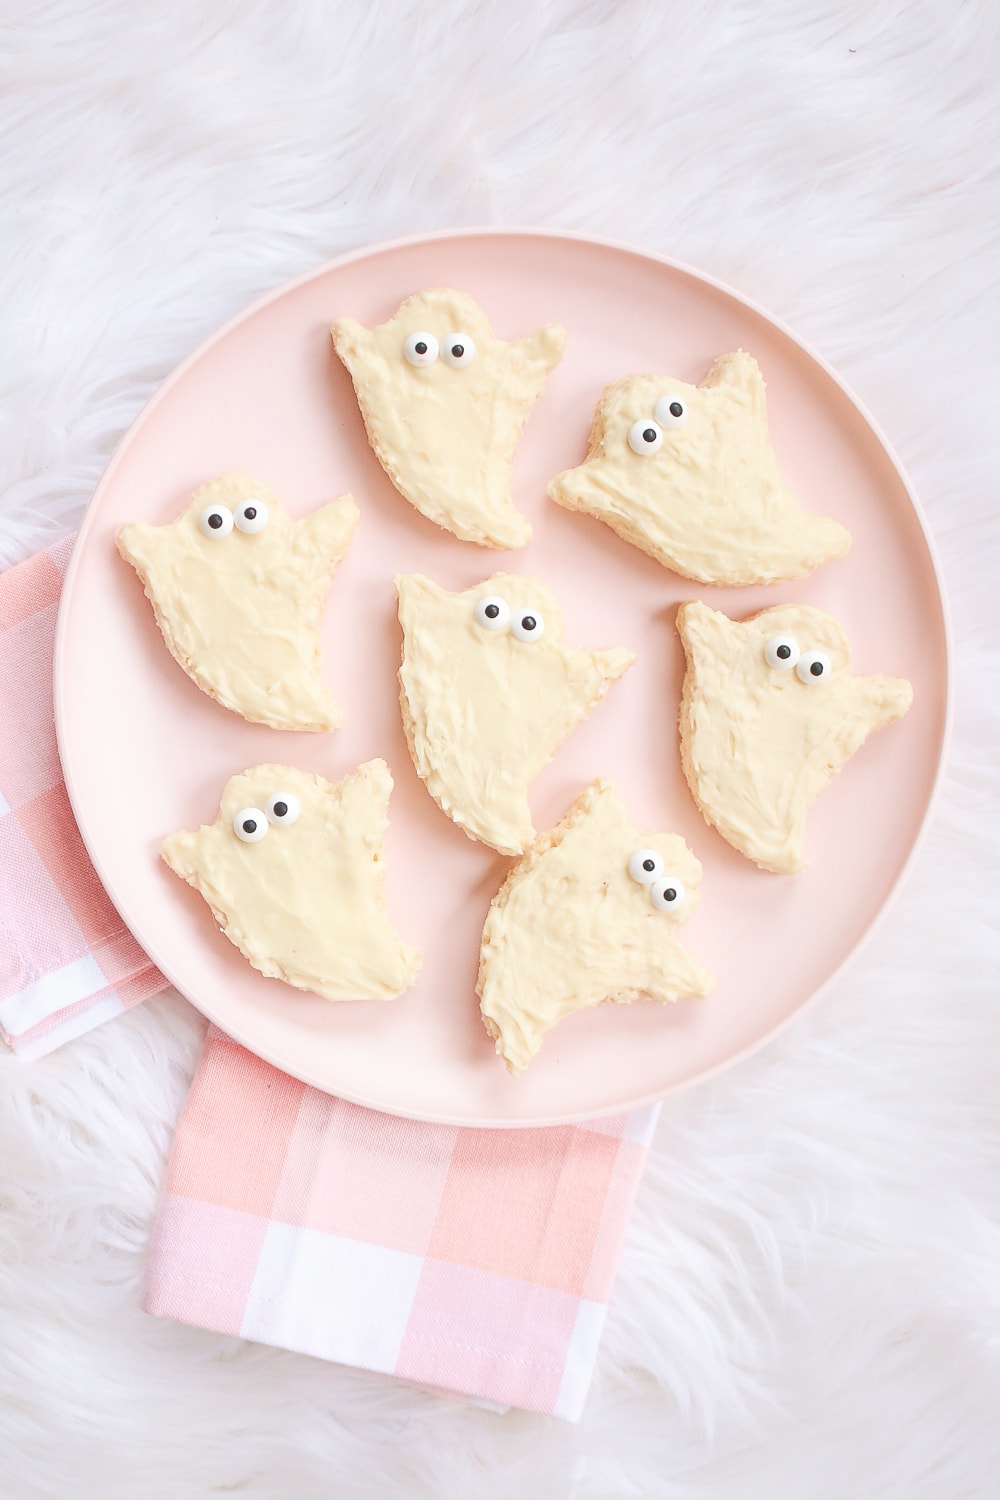 Ghost-shaped Halloween Rice Krispie treats recipe by southern blogger Stephanie Ziajka on Diary of a Debutante